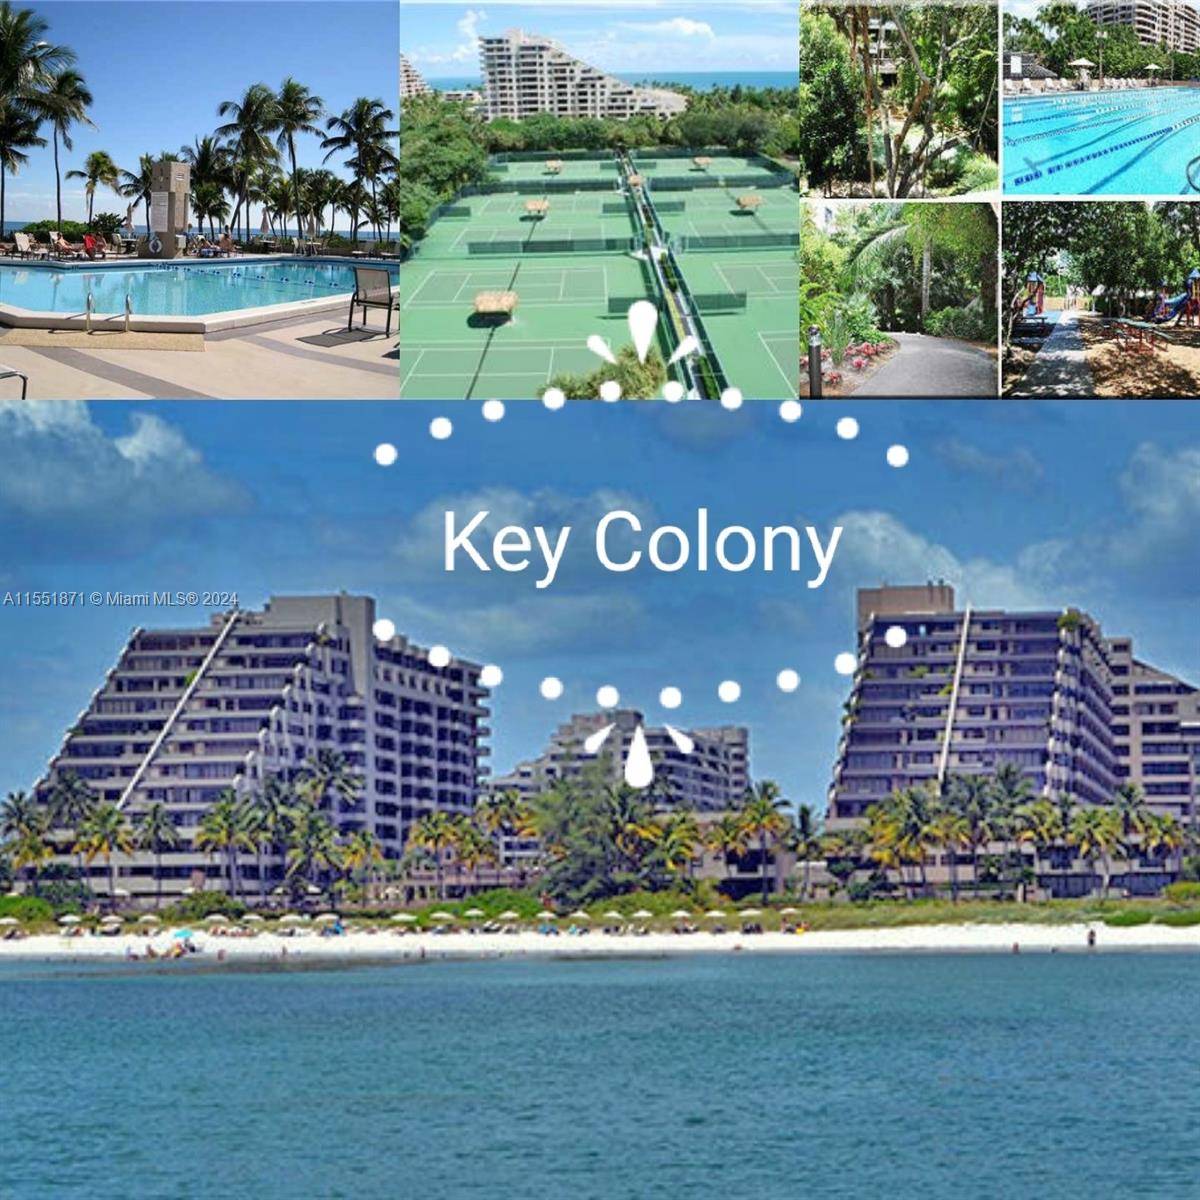 BEST PRICE IN TIDEMARK ! Experience an Oceanfront resort like lifestyle in the exclusive Key Colony community in the Island Paradise of Key Biscayne.